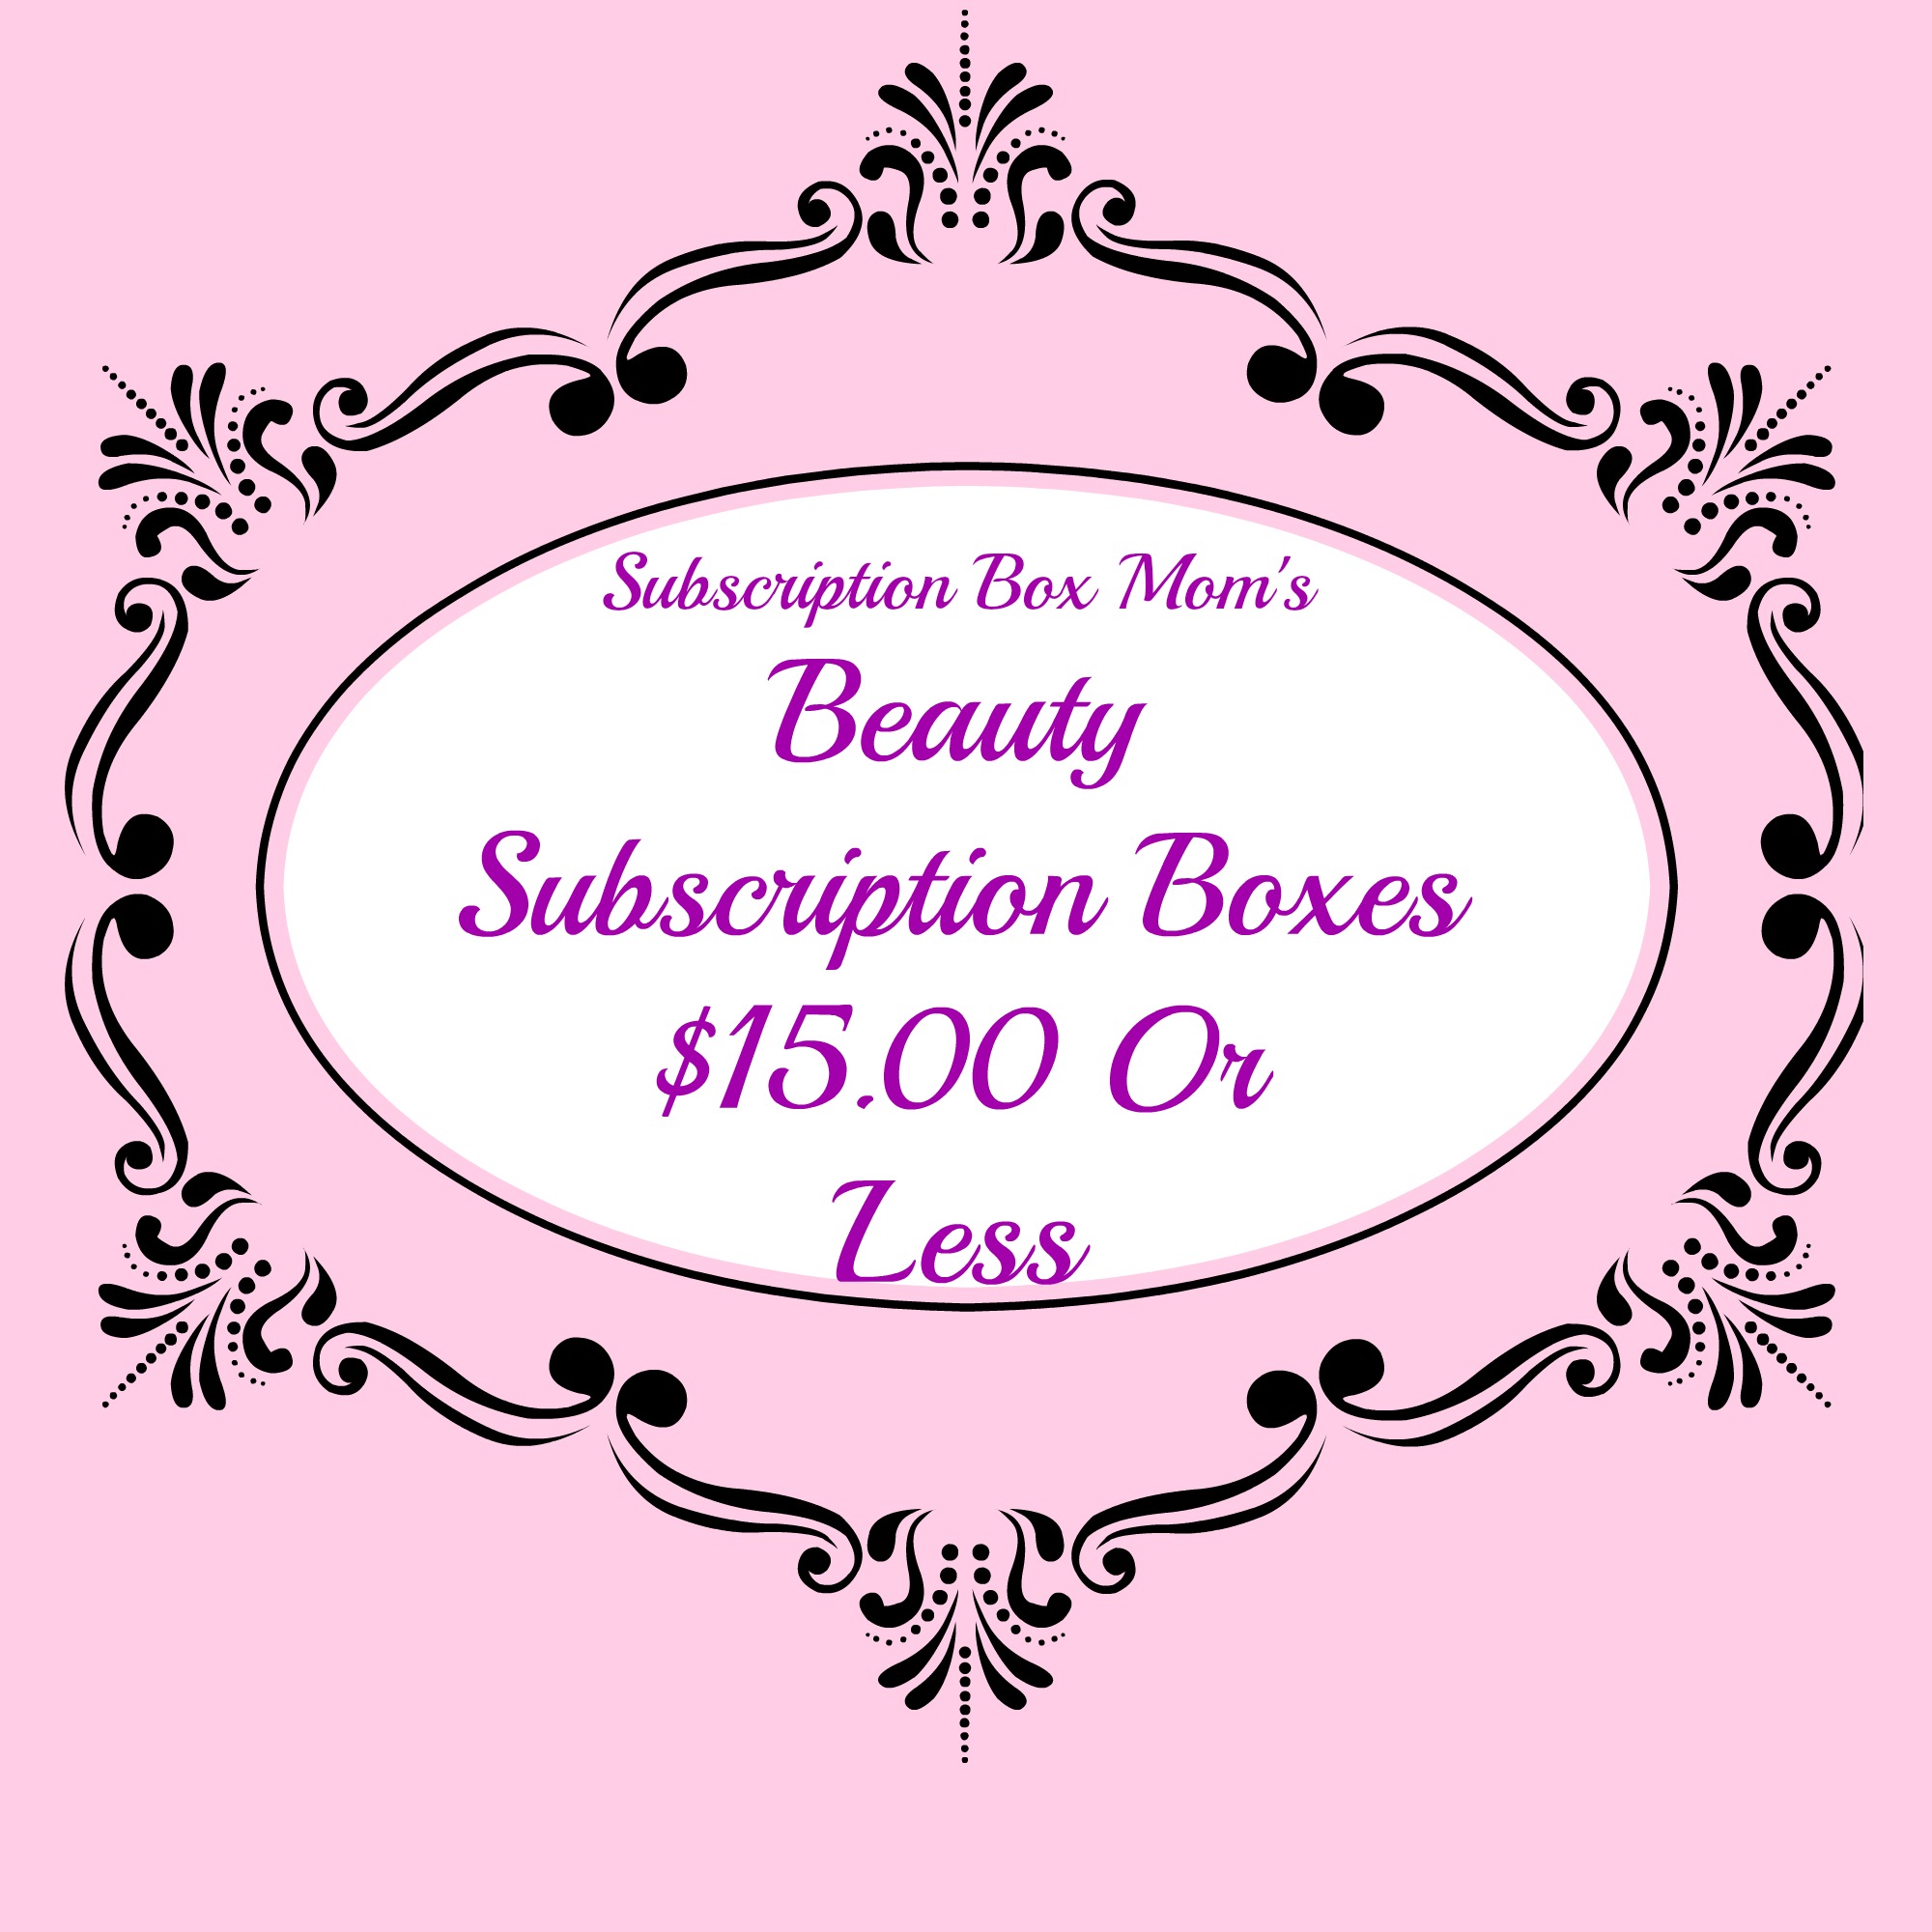 Beauty Subscription Boxes $15.00 or Less » Subscription Box Mom